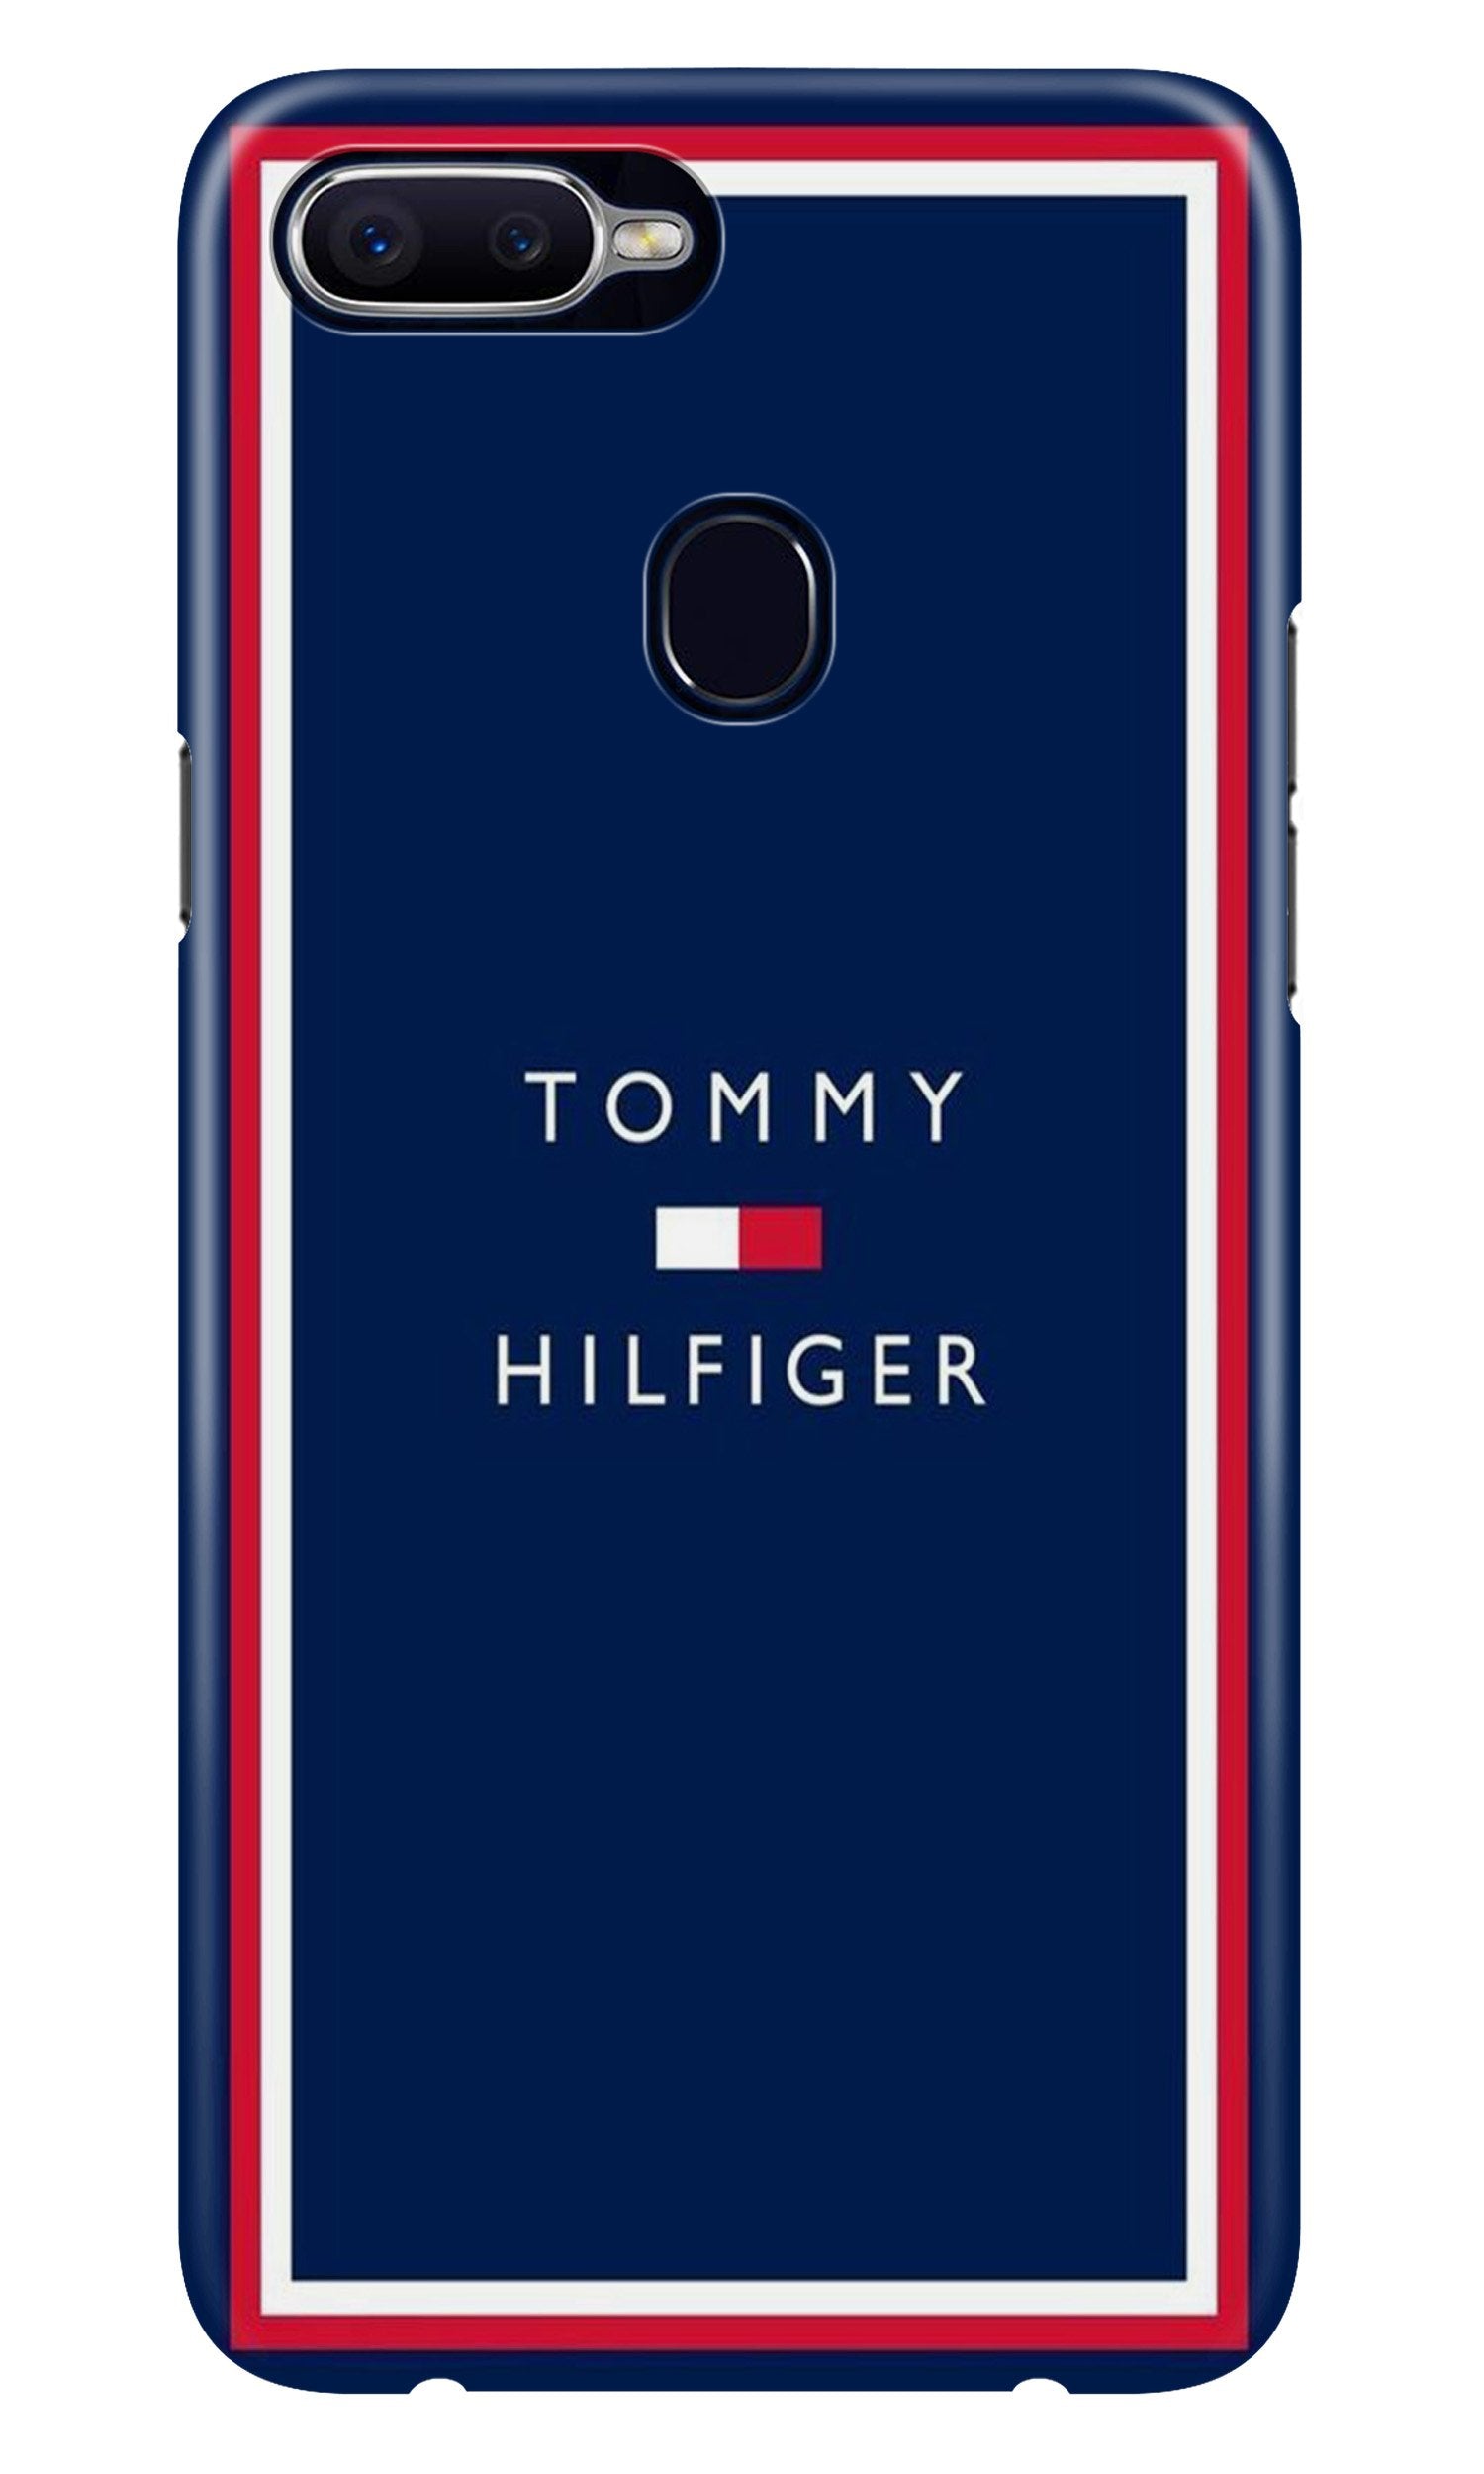 Tommy Hilfiger Case for Oppo A5s (Design No. 275)